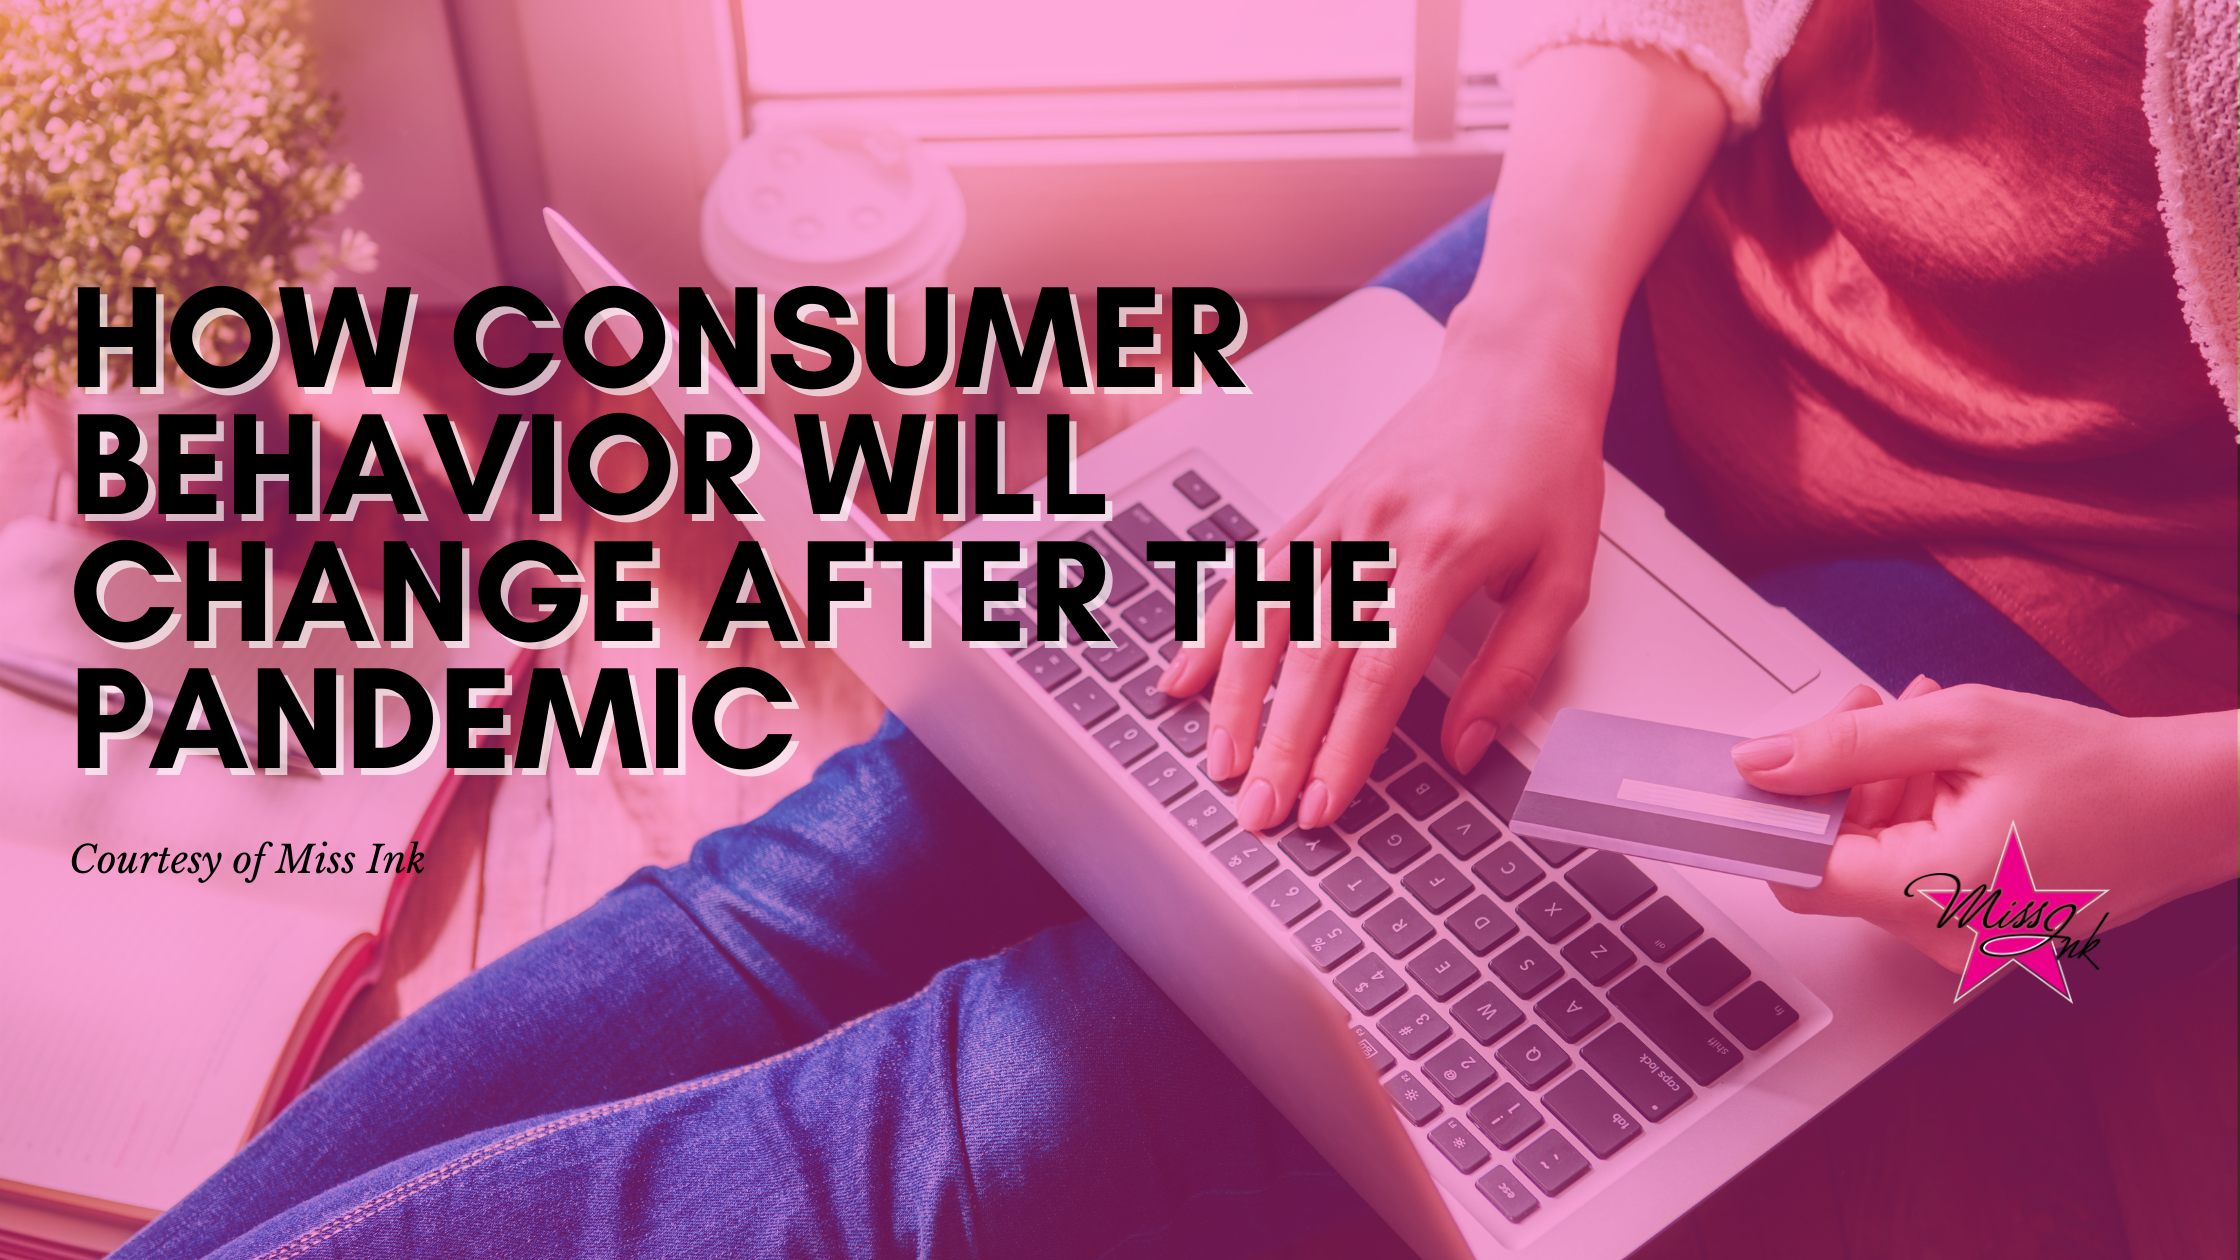 How Consumer Behavior Will Change After the Pandemic.